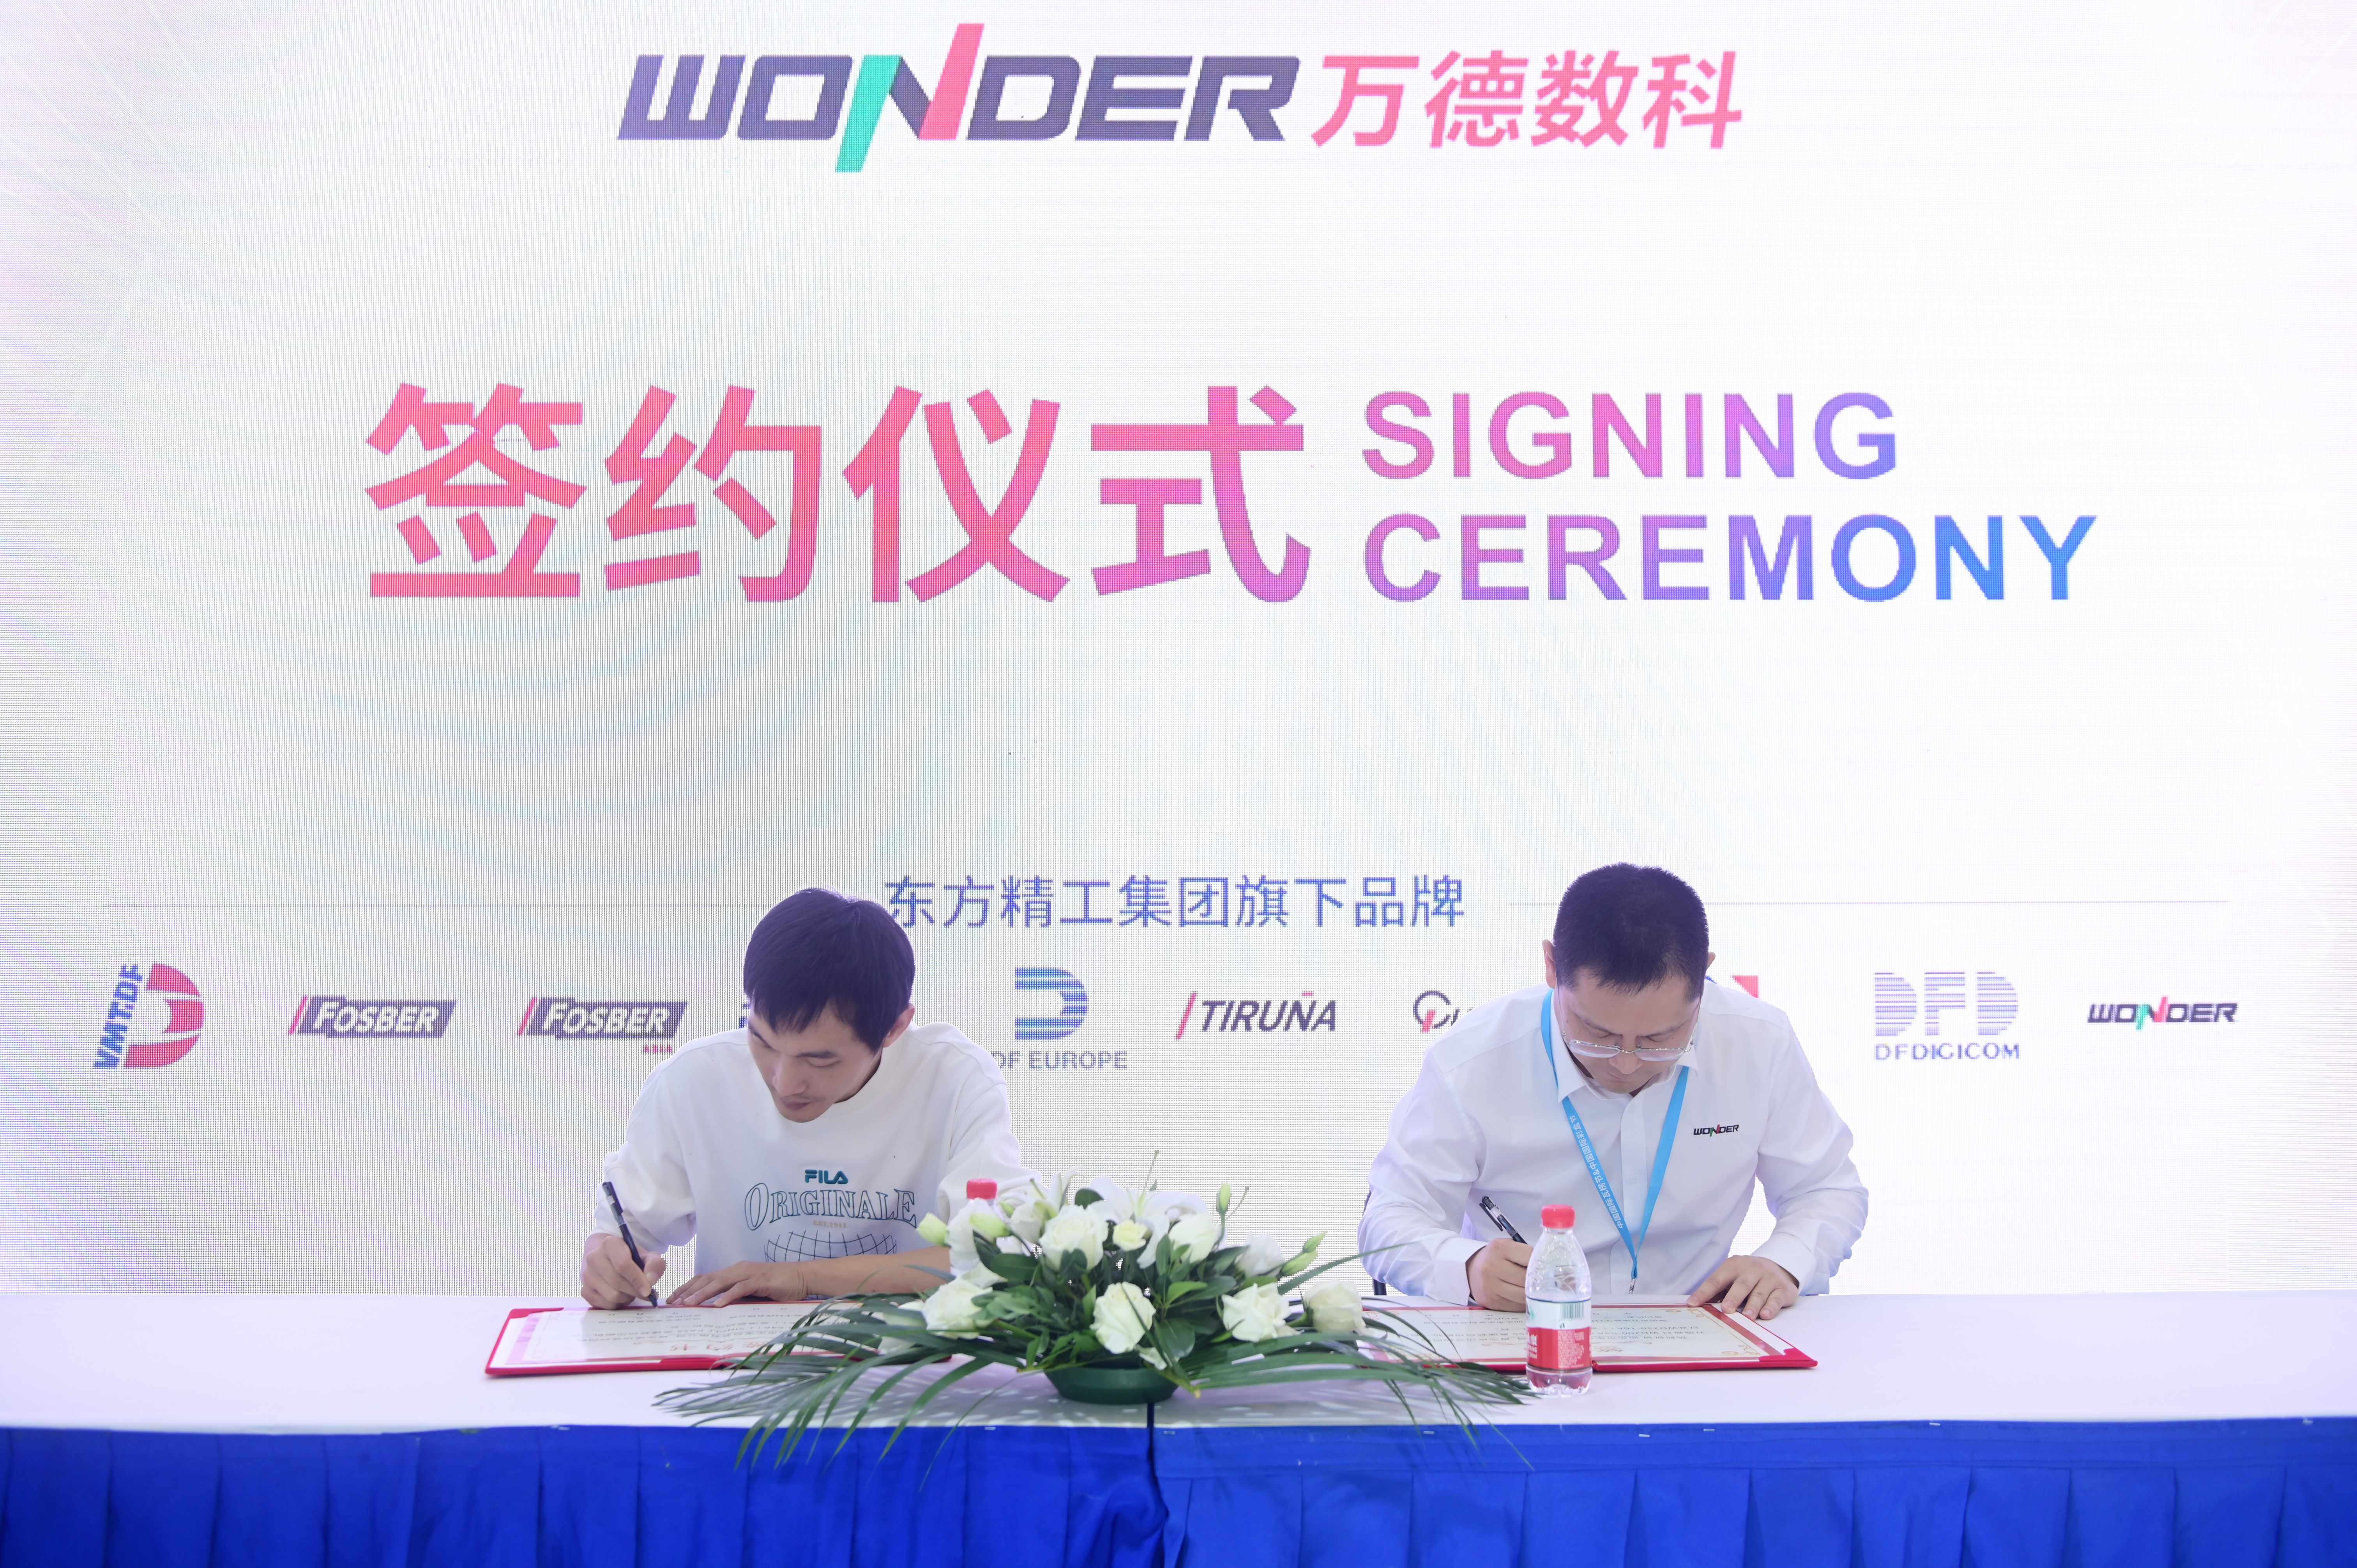 Wonder Digital had a glamorous debut on 2023 Chinese International Corrugated Festival, and signed quite a few digital printing machines!